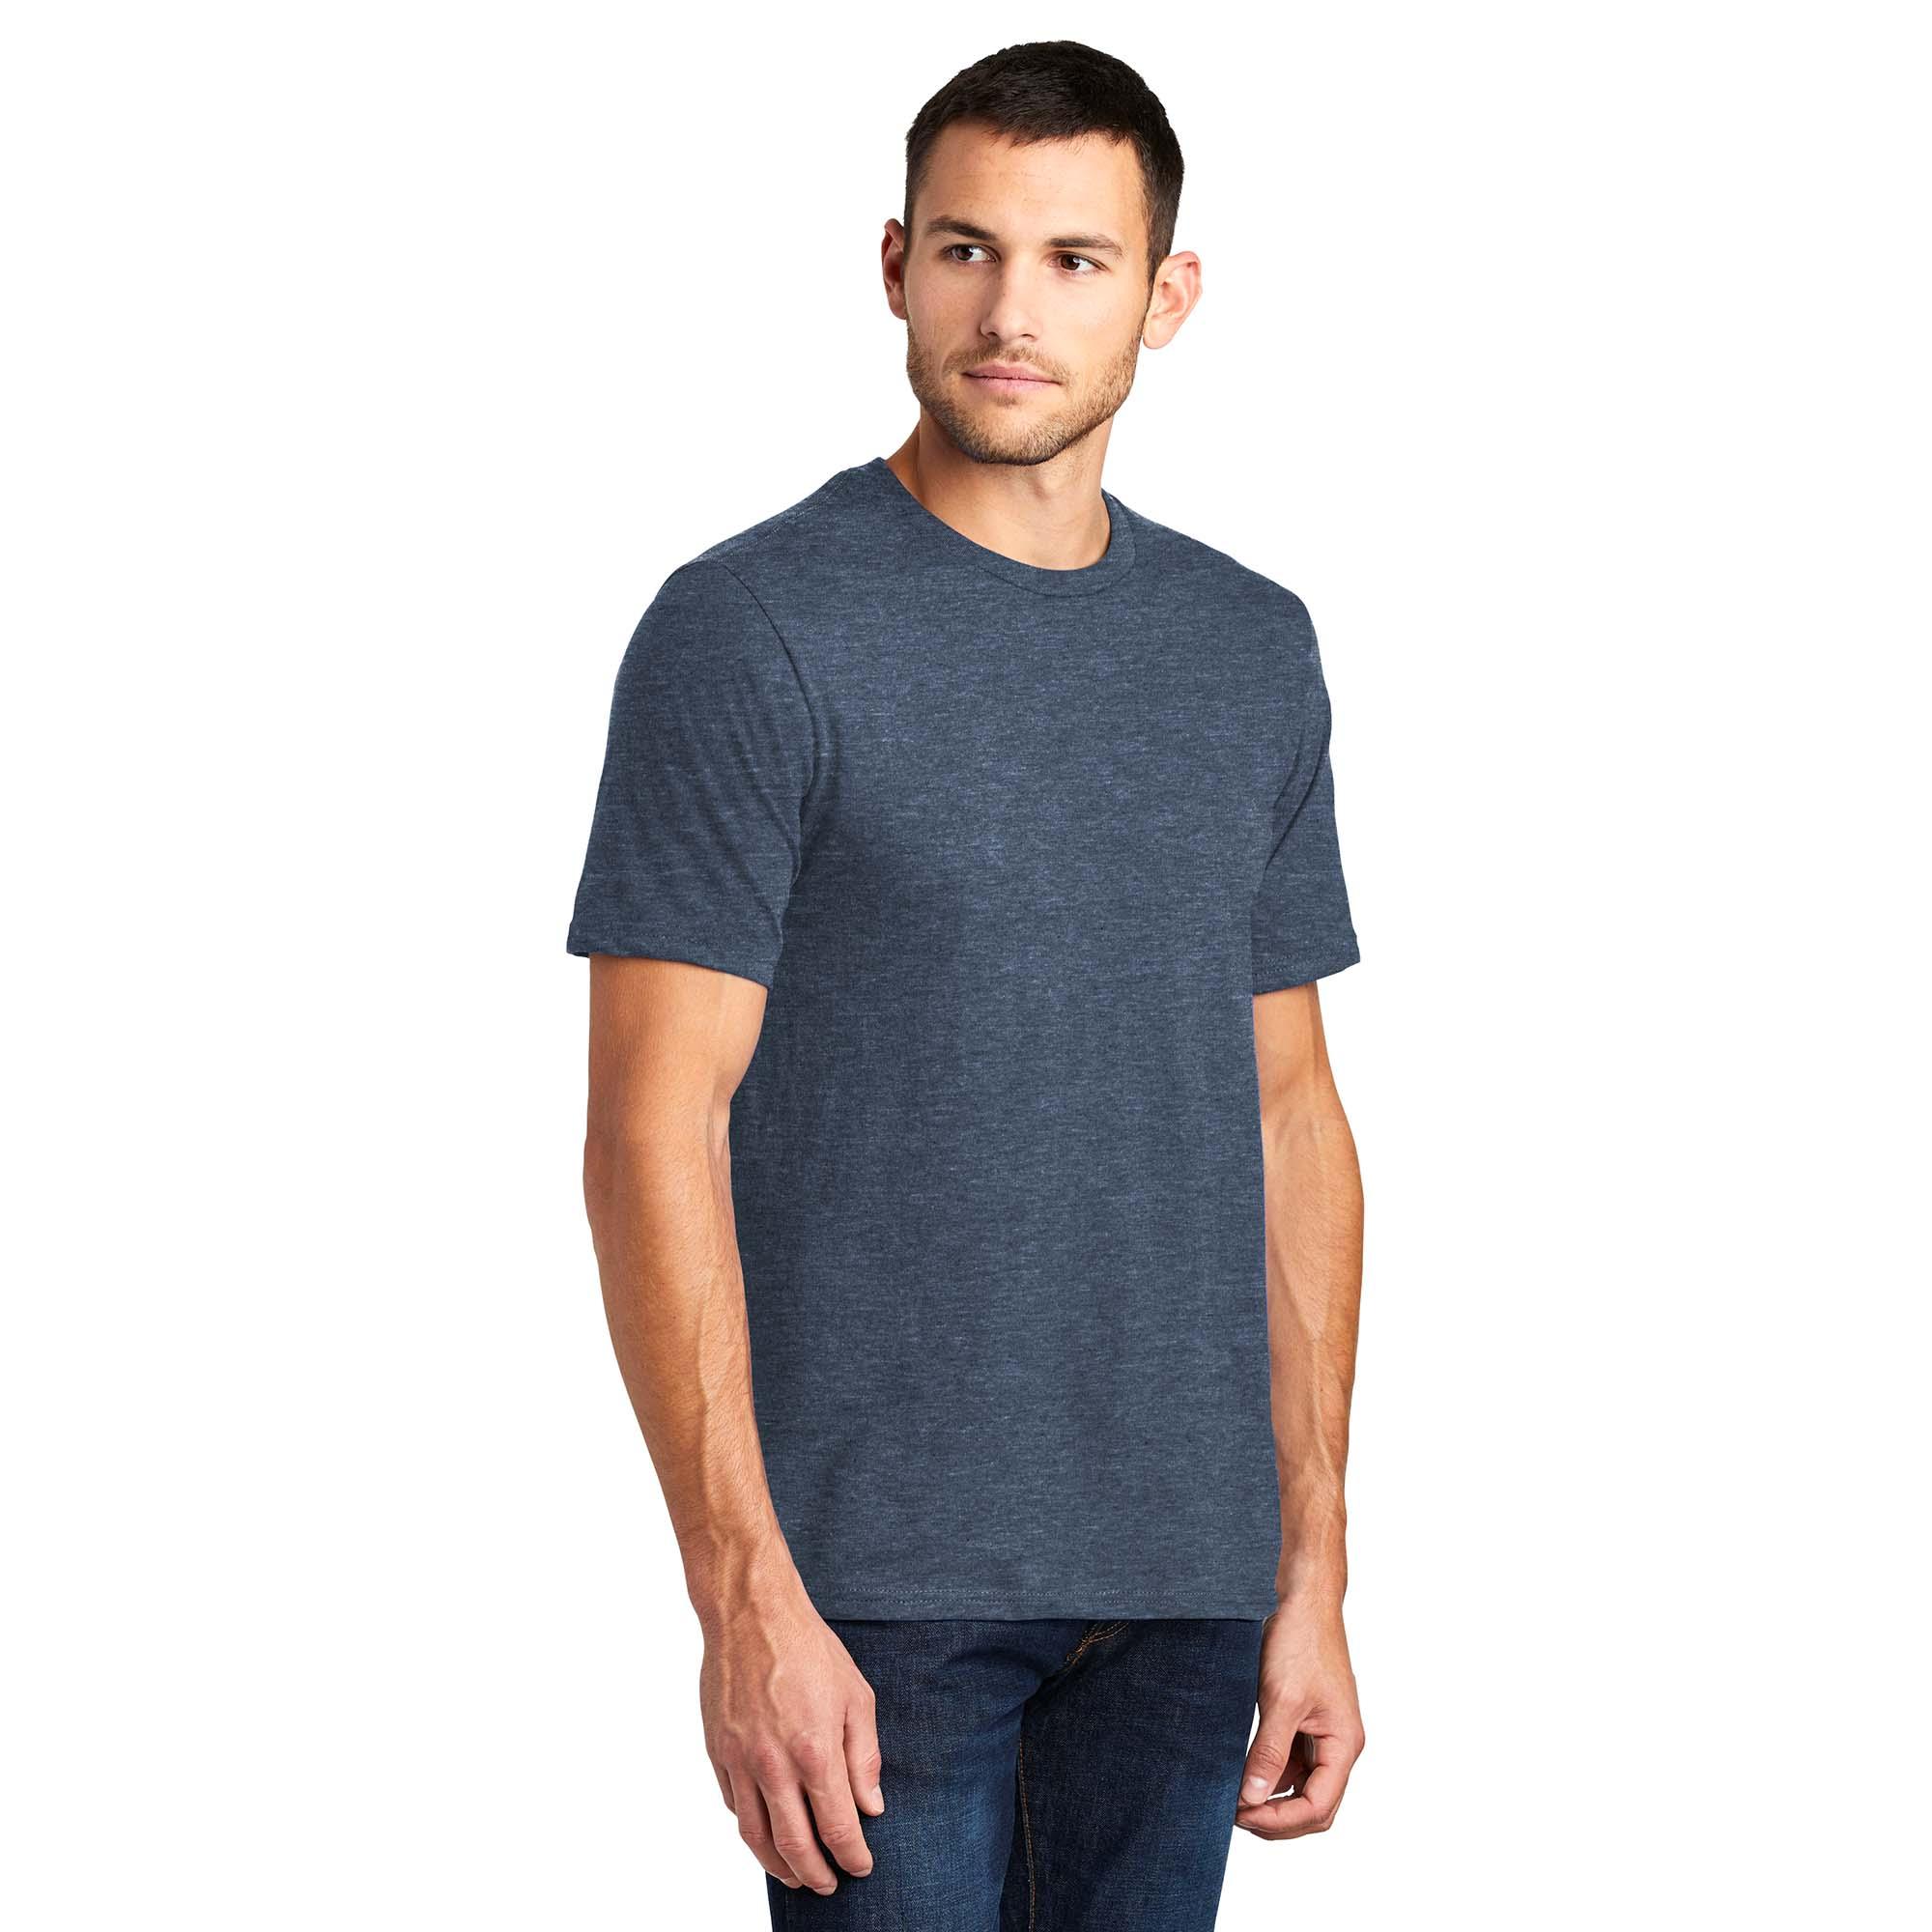 District DT6000 Very Important Tee - Heathered Navy | Full Source